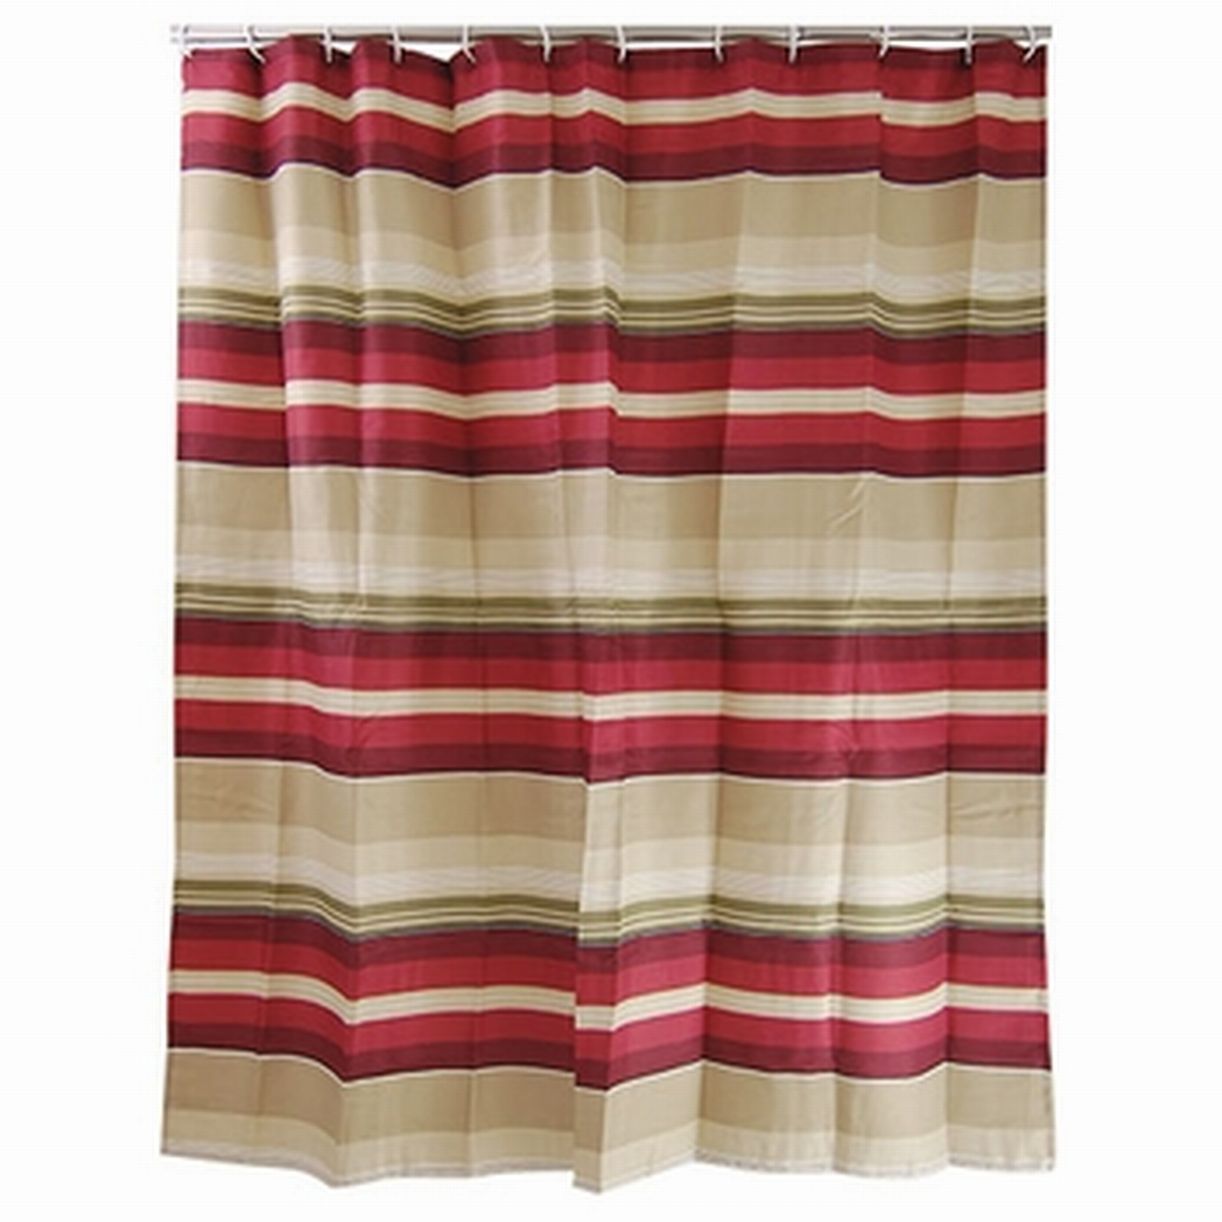 Madison striped shower curtain